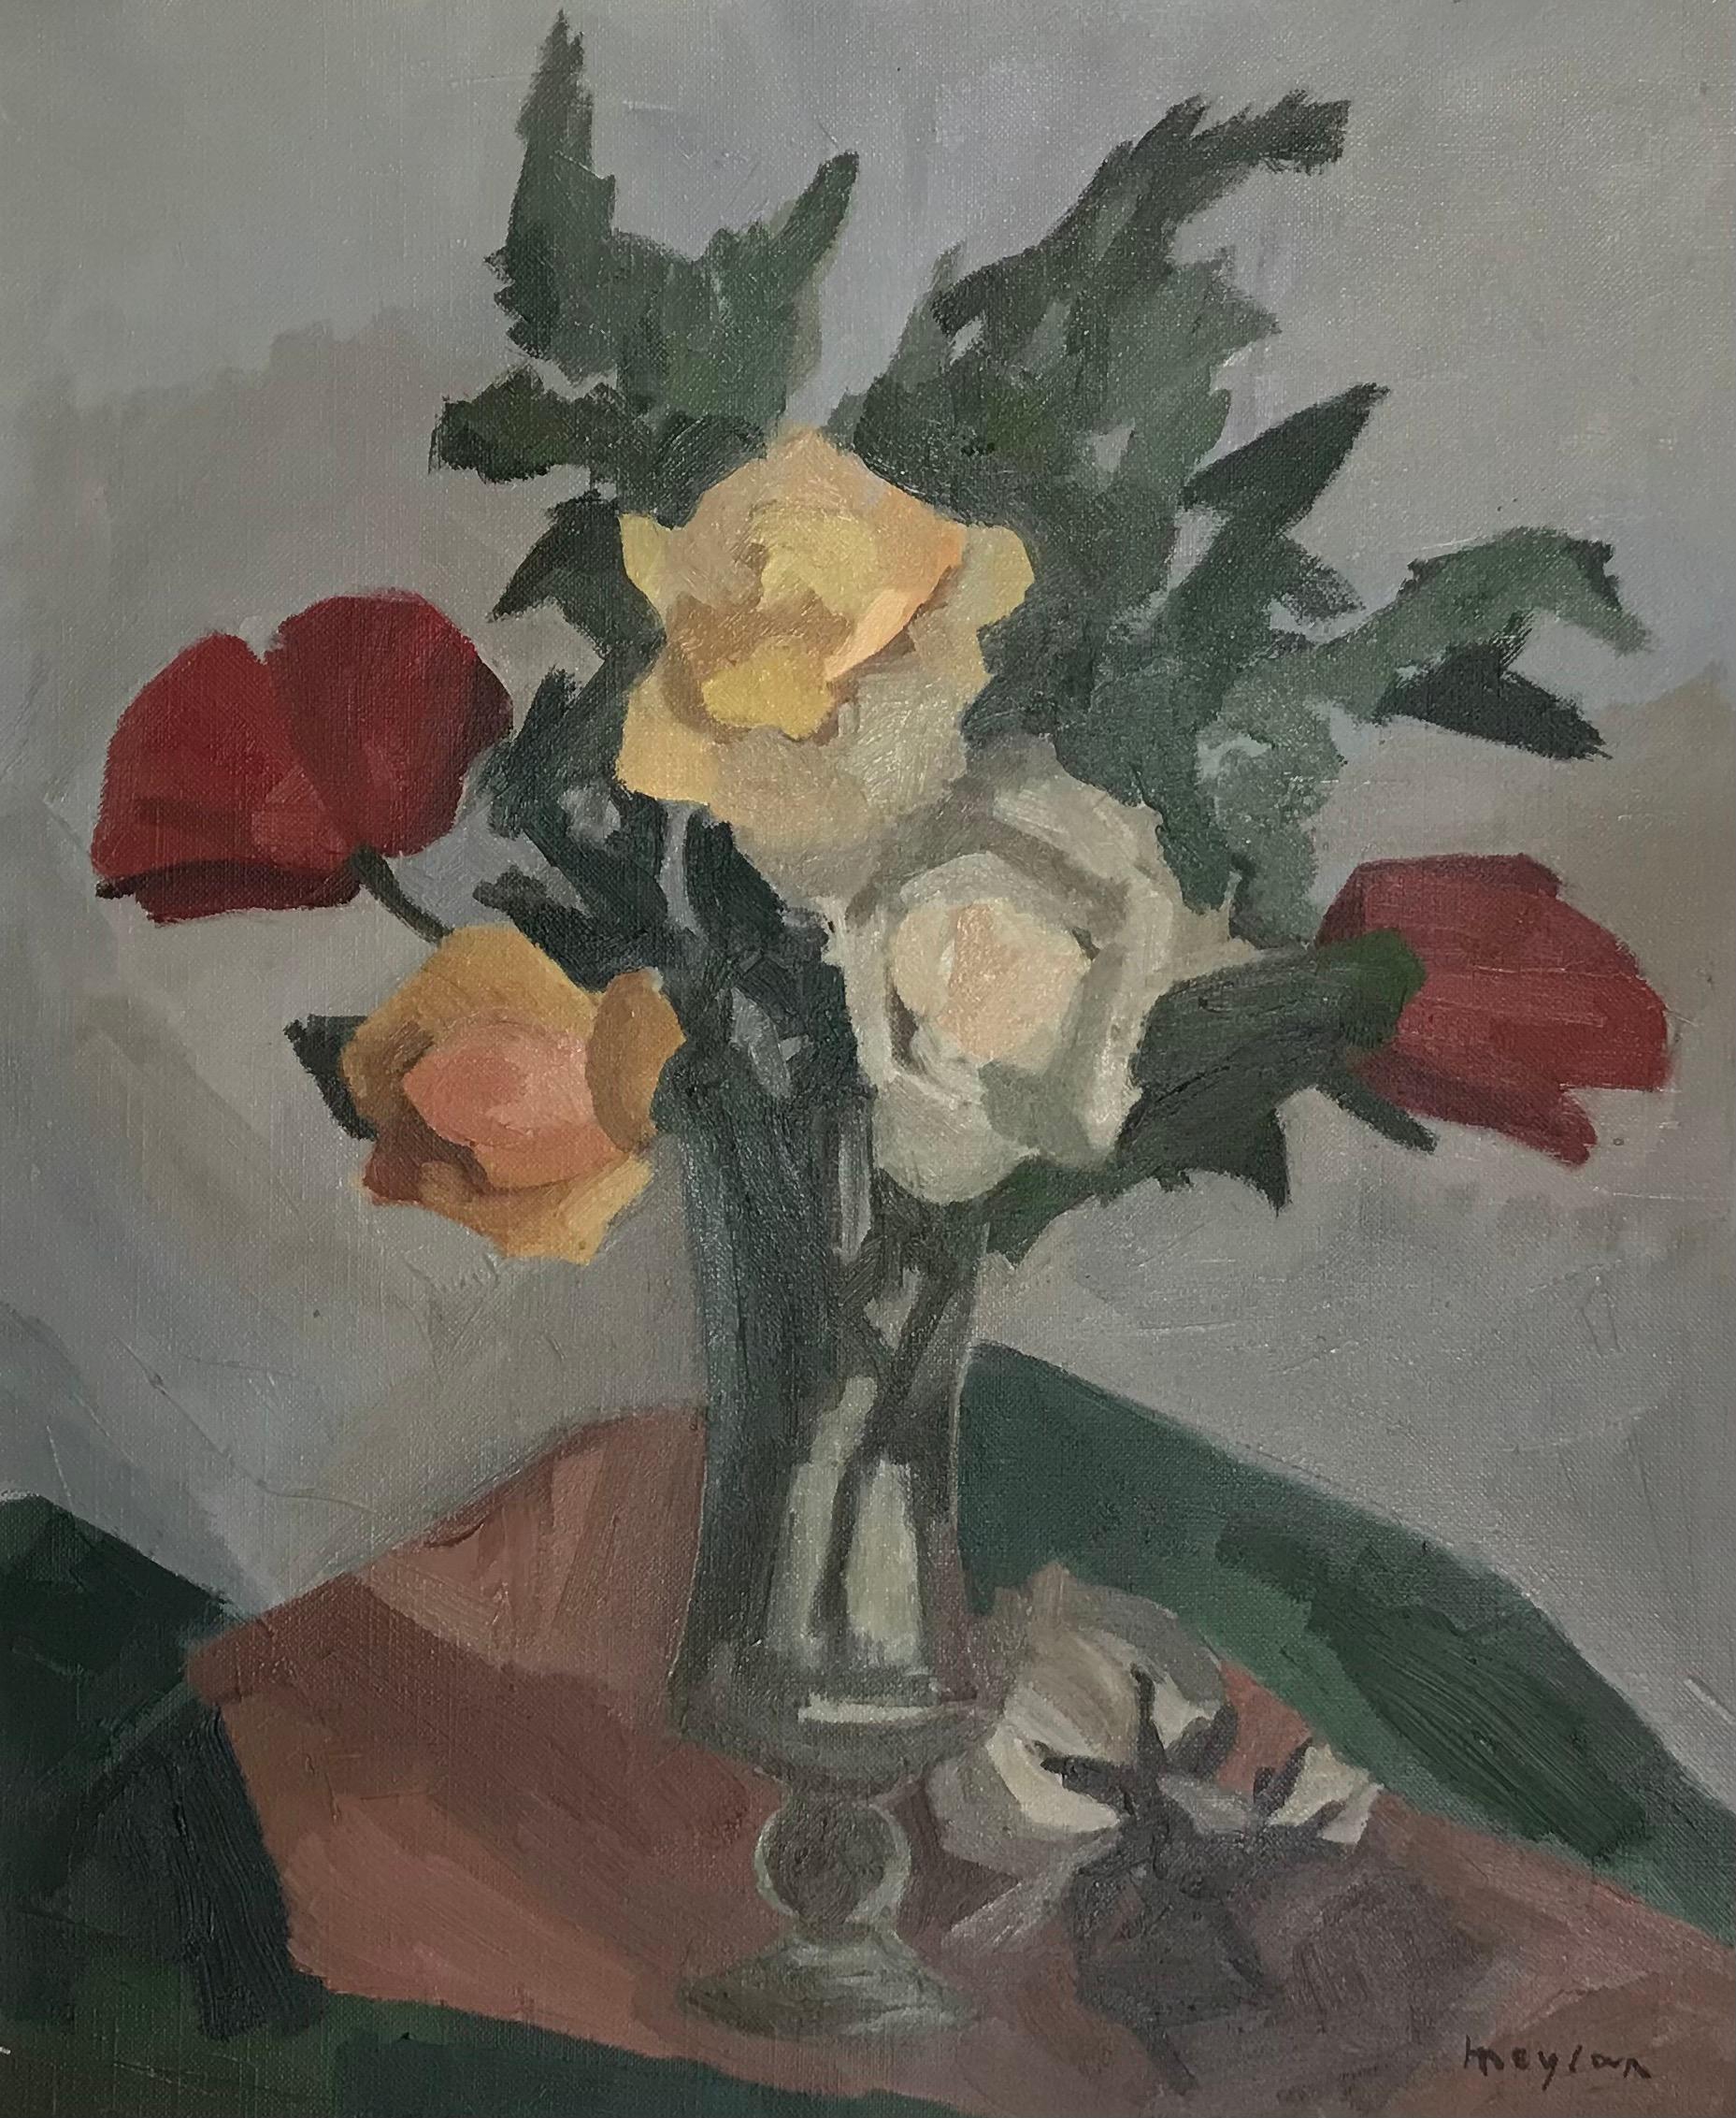 Large bouquet by Henry Meylan - Oil on canvas 